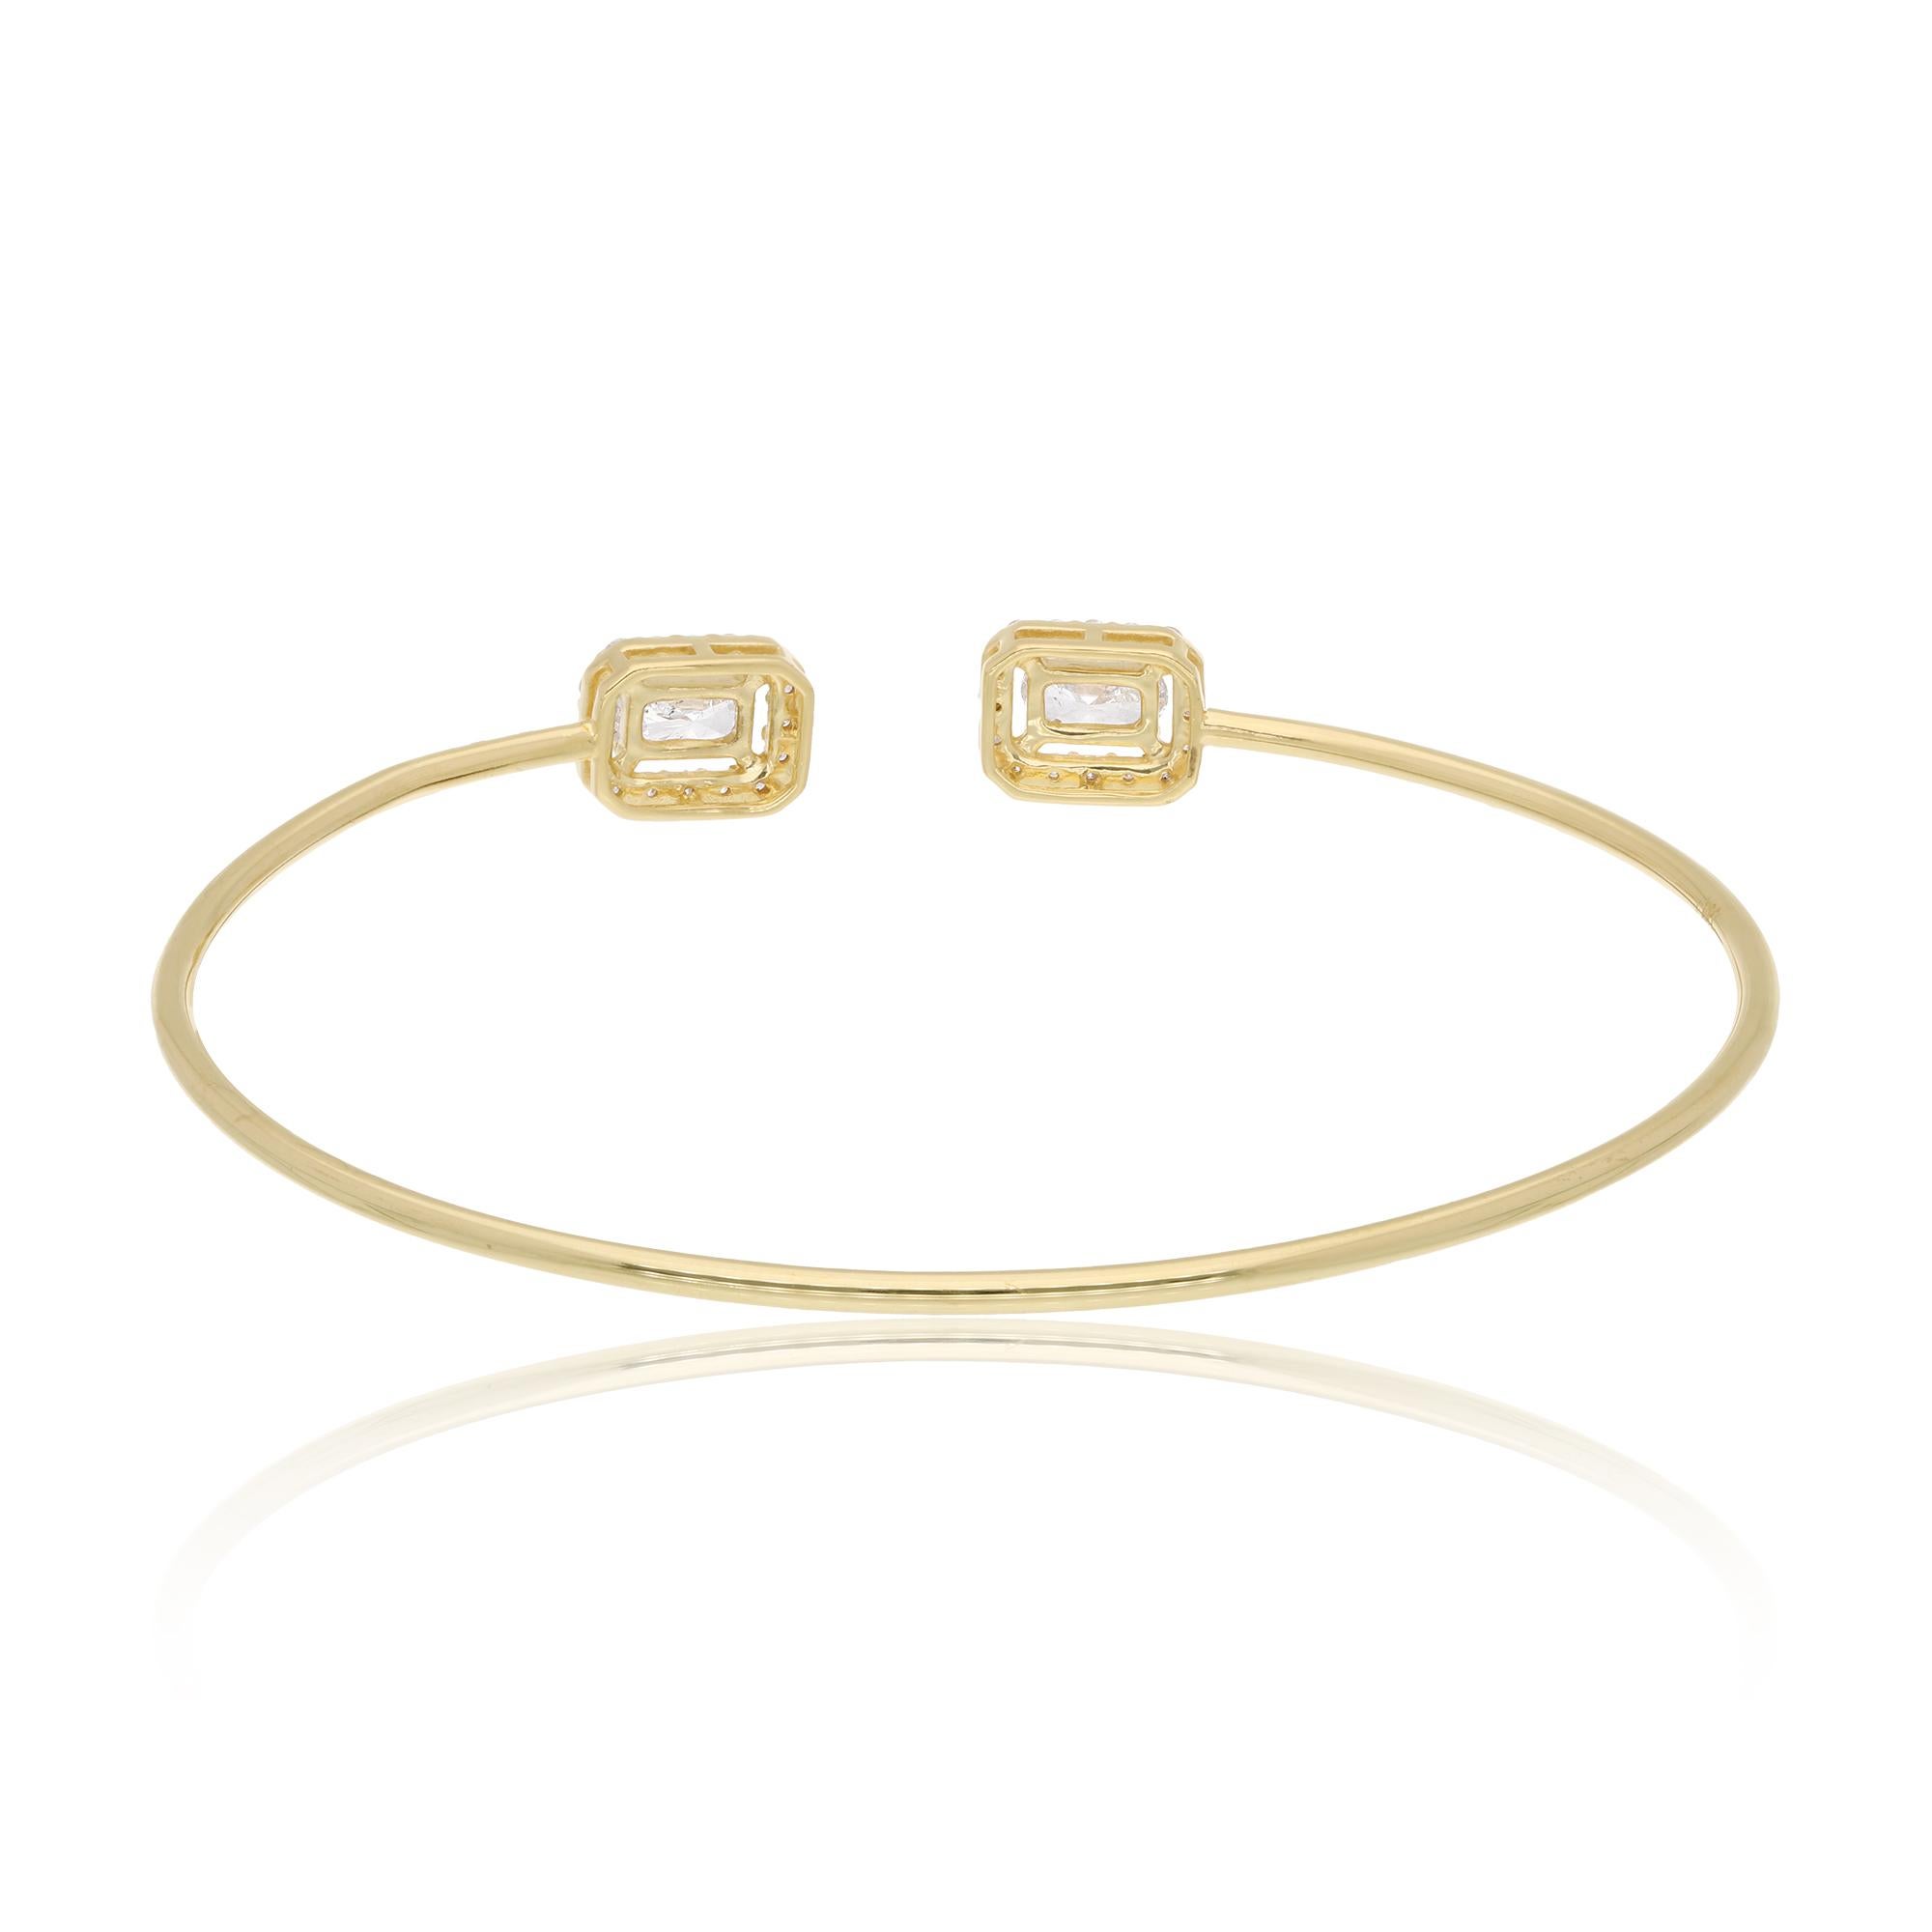 The bracelet features a sleek and modern design, with a cuff style that effortlessly wraps around the wrist, offering a comfortable and secure fit. Its smooth, polished surface glimmers with the warm glow of 14 karat yellow gold, adding a touch of